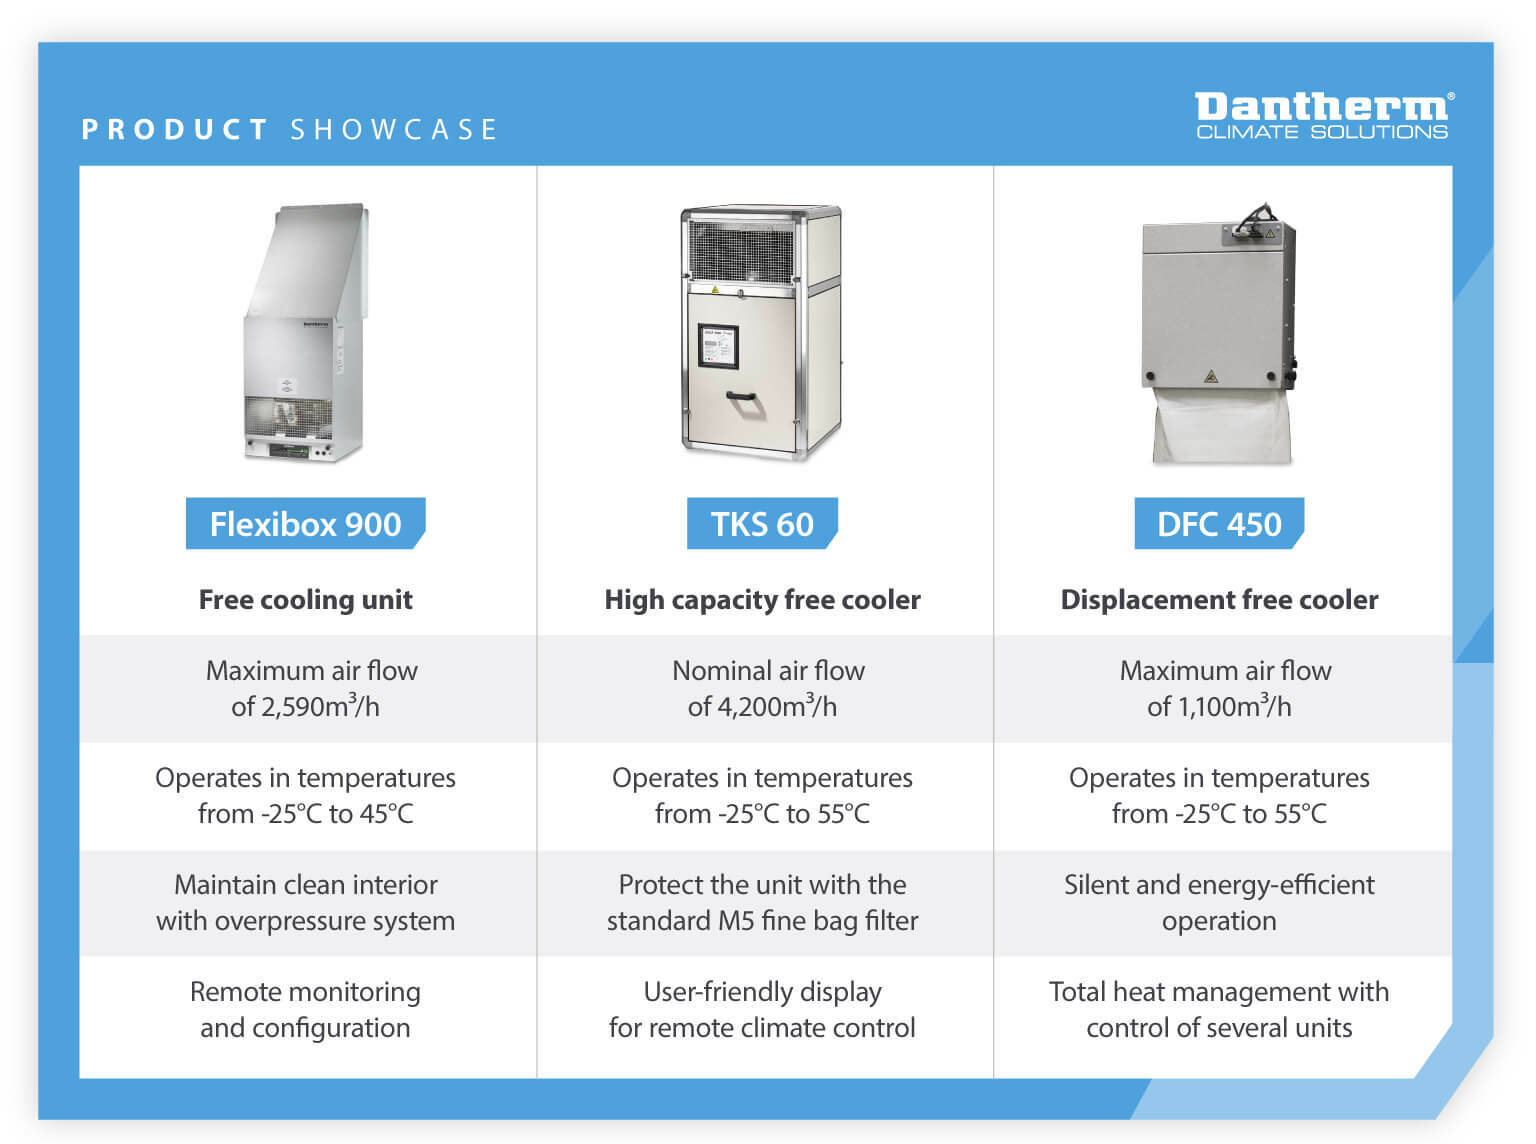 Product showcase comparing features of Dantherm free cooling units including high capacity and displacement free coolers